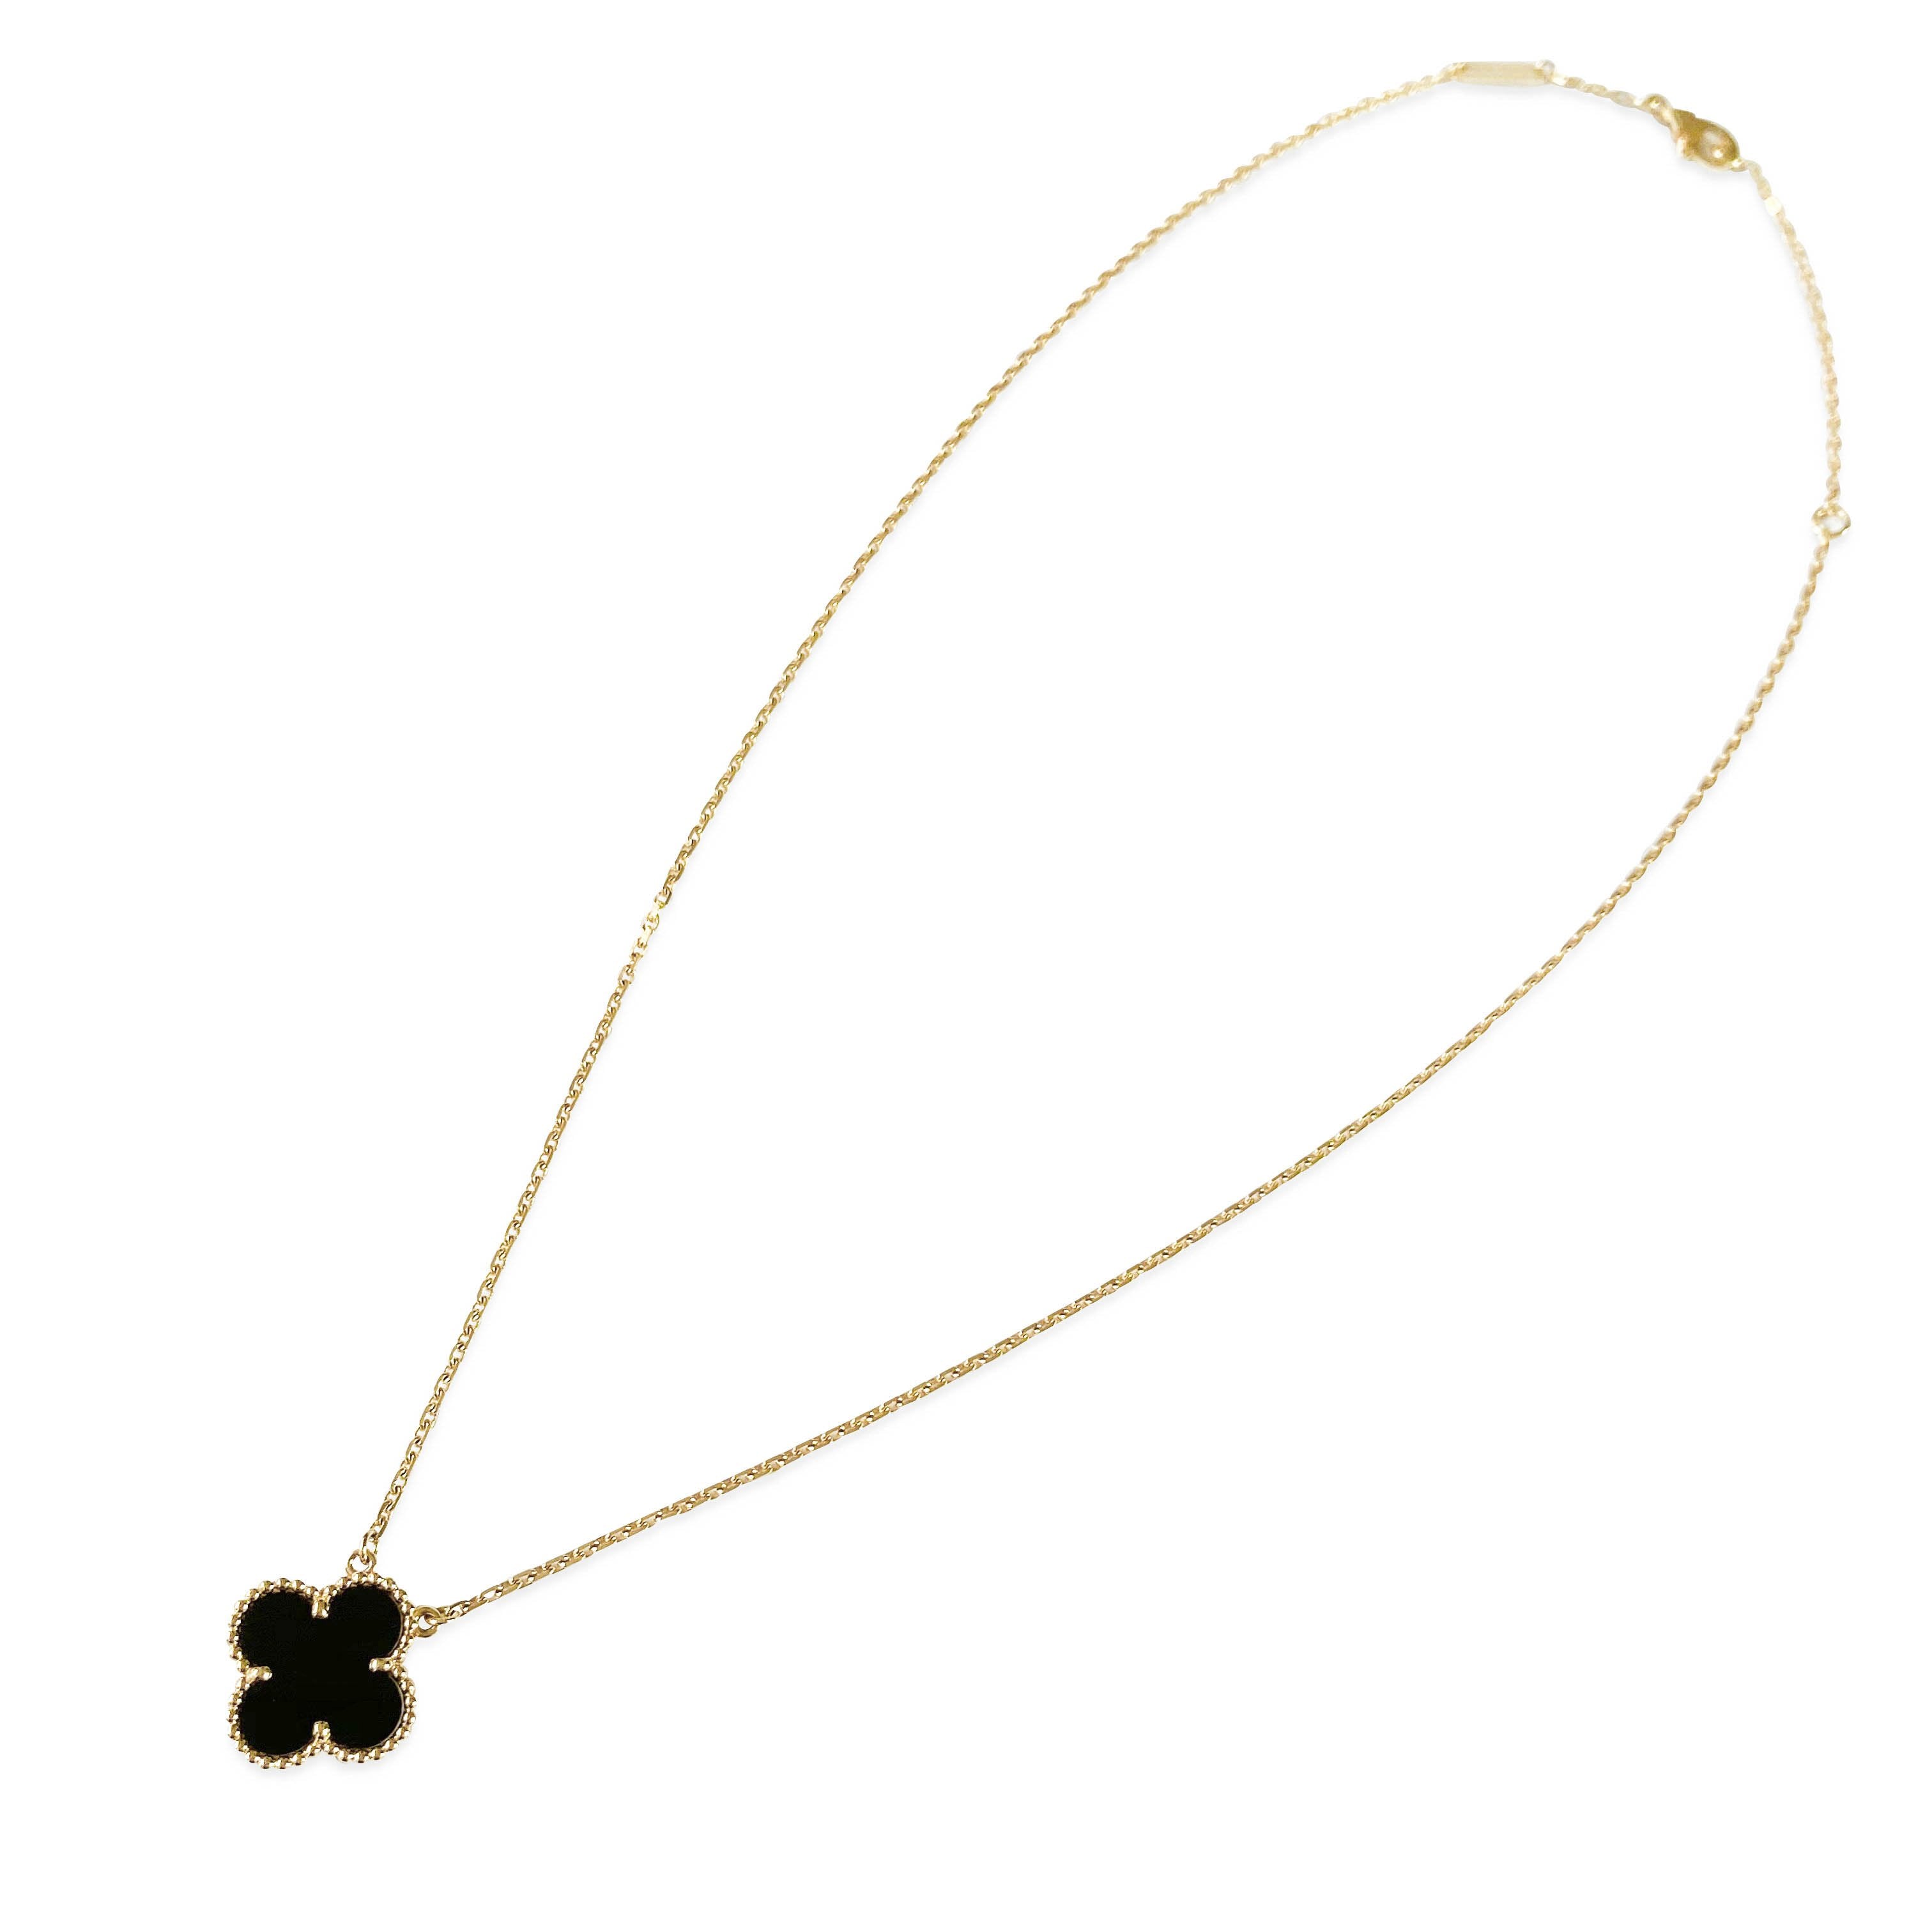 Vintage Alhambra Pendant Necklace in 18k Yellow Gold Onyx